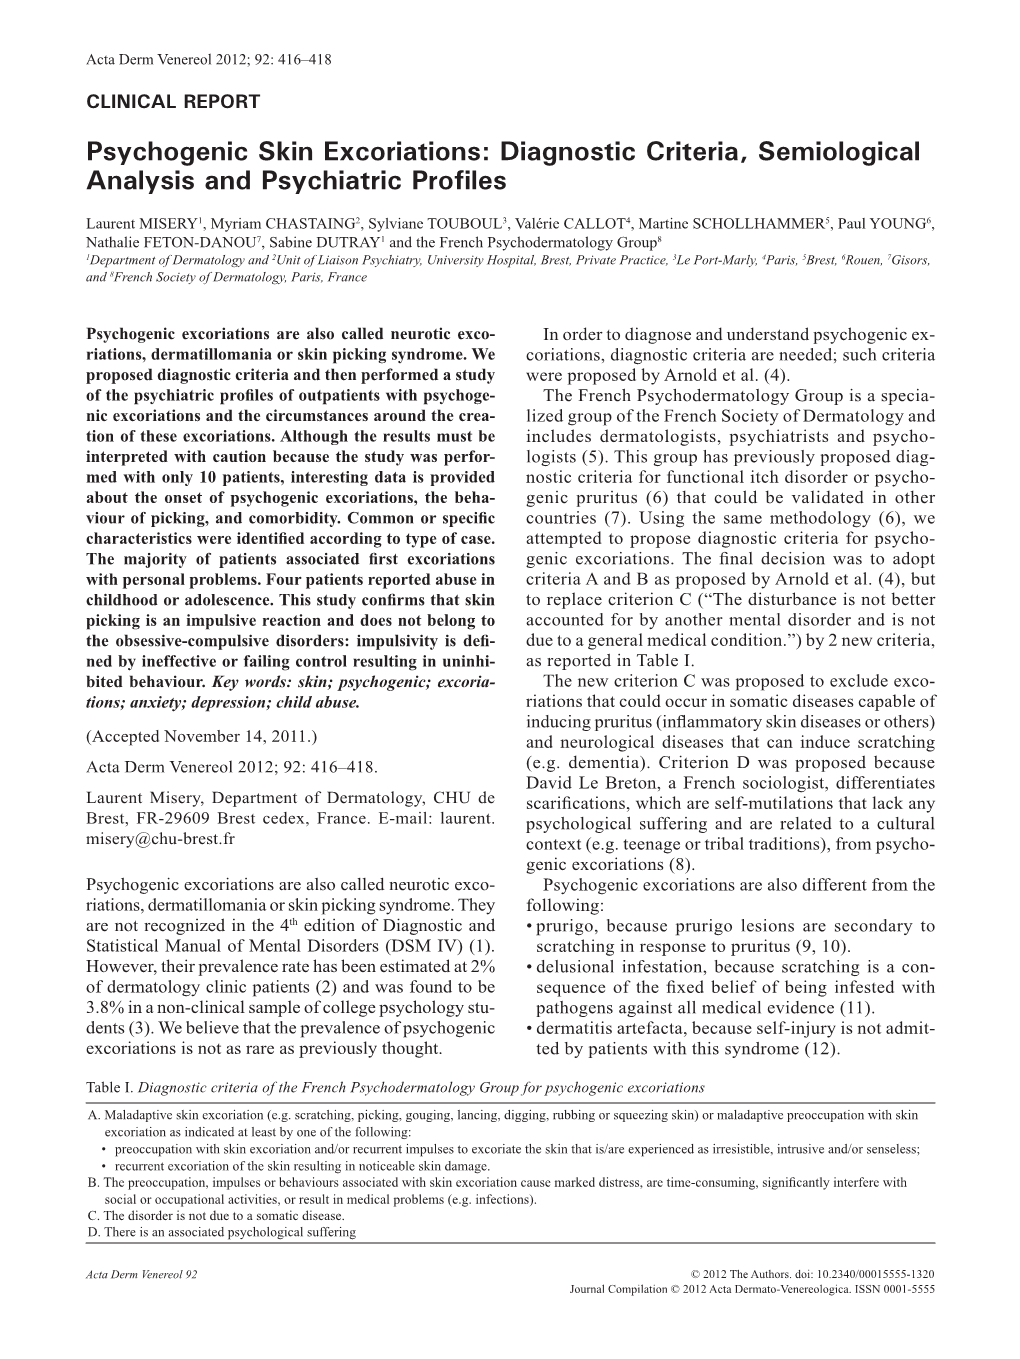 Psychogenic Skin Excoriations: Diagnostic Criteria, Semiological Analysis and Psychiatric Profiles